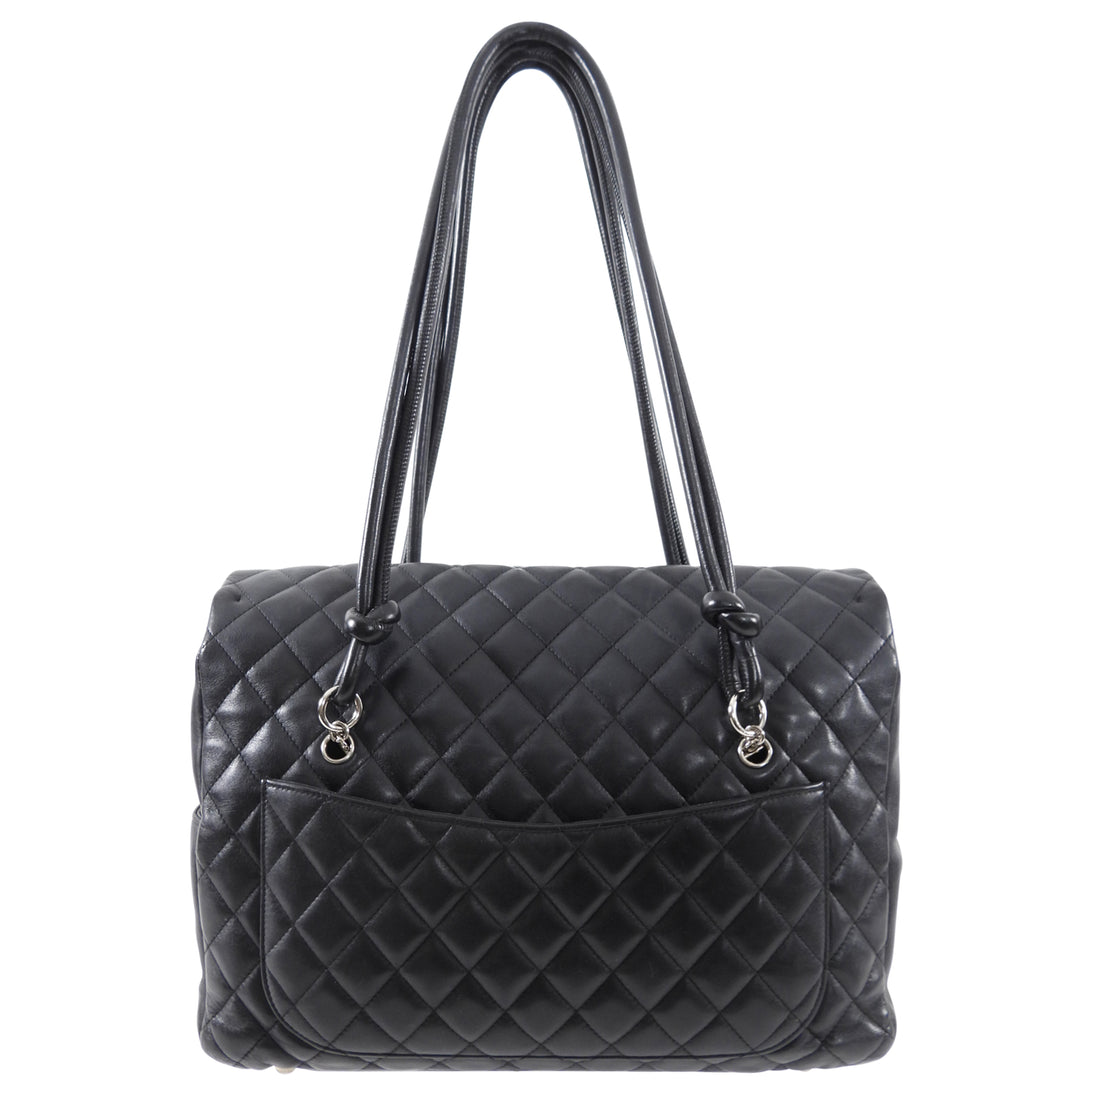 Chanel Black and White Cambon CC Shoulder Flap Bag